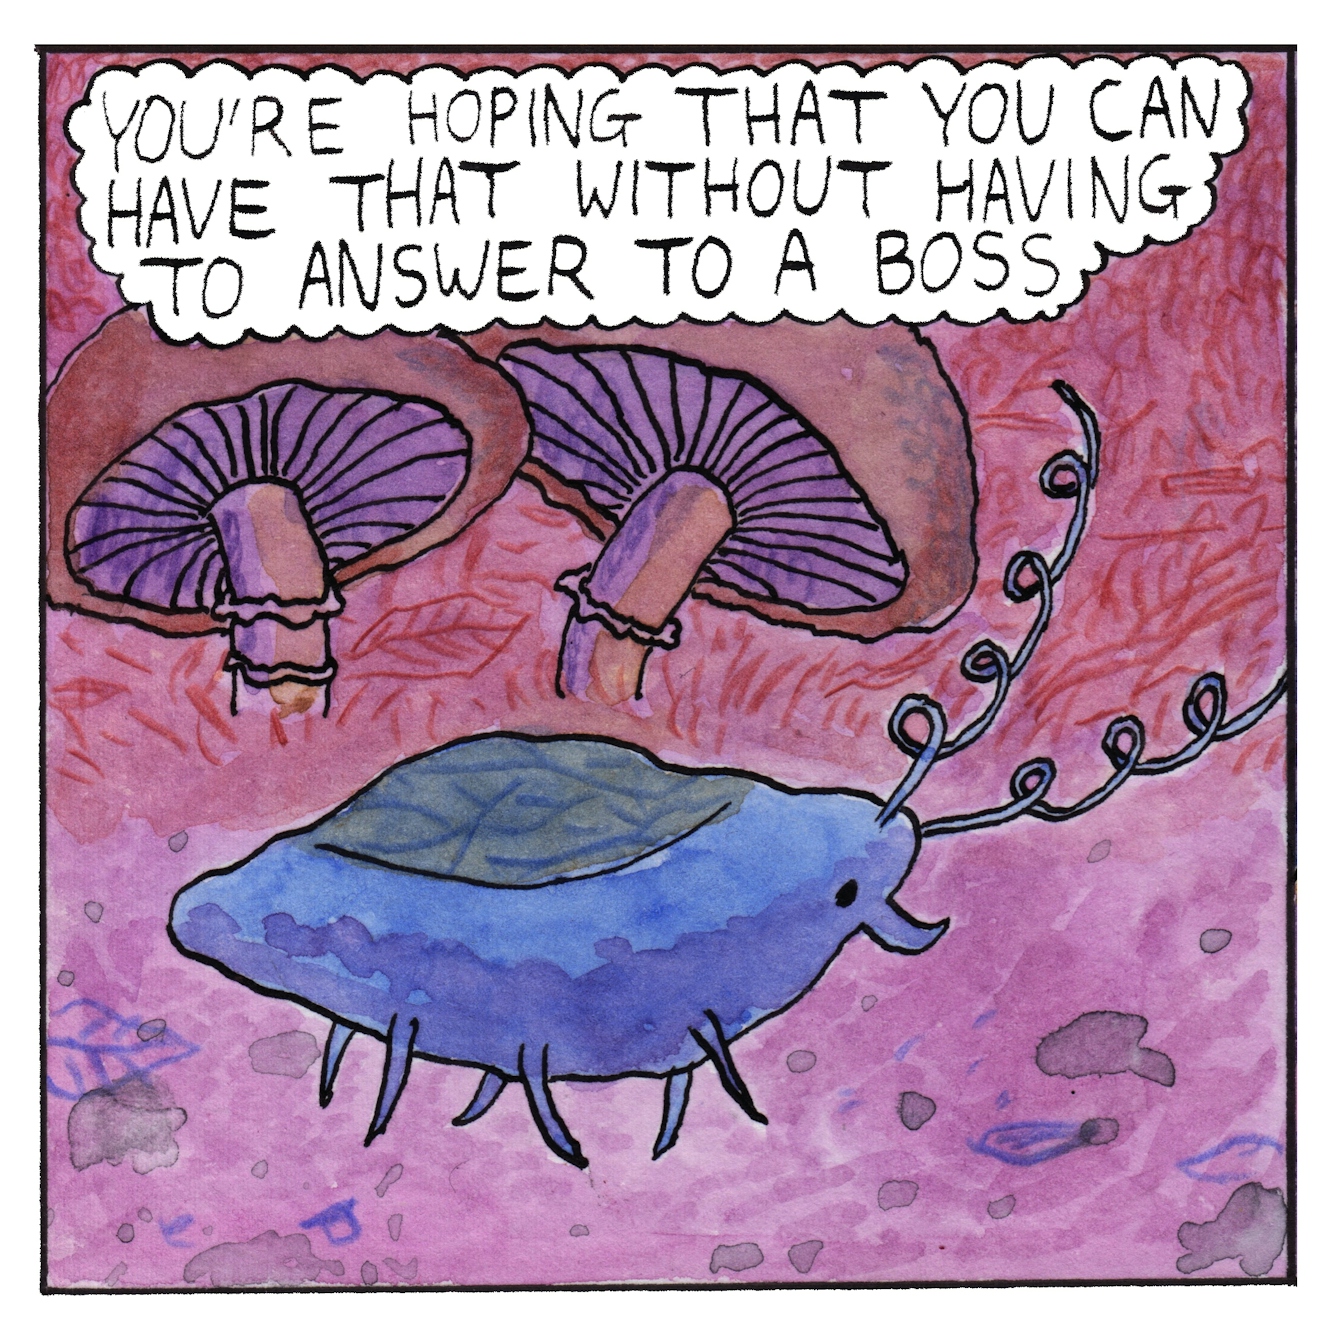 Panel 5 of a six-panel comic made with ink, watercolour and colour pencils: In the foreground, a small blue bug with long curly antennae and folded wings trots, eyes down, along the forest floor. Two plump brown mushrooms are behind it, showing the gills in their undersides. A text bubble above the mushrooms reads: “You’re hoping that you can have that without having to answer to a boss”